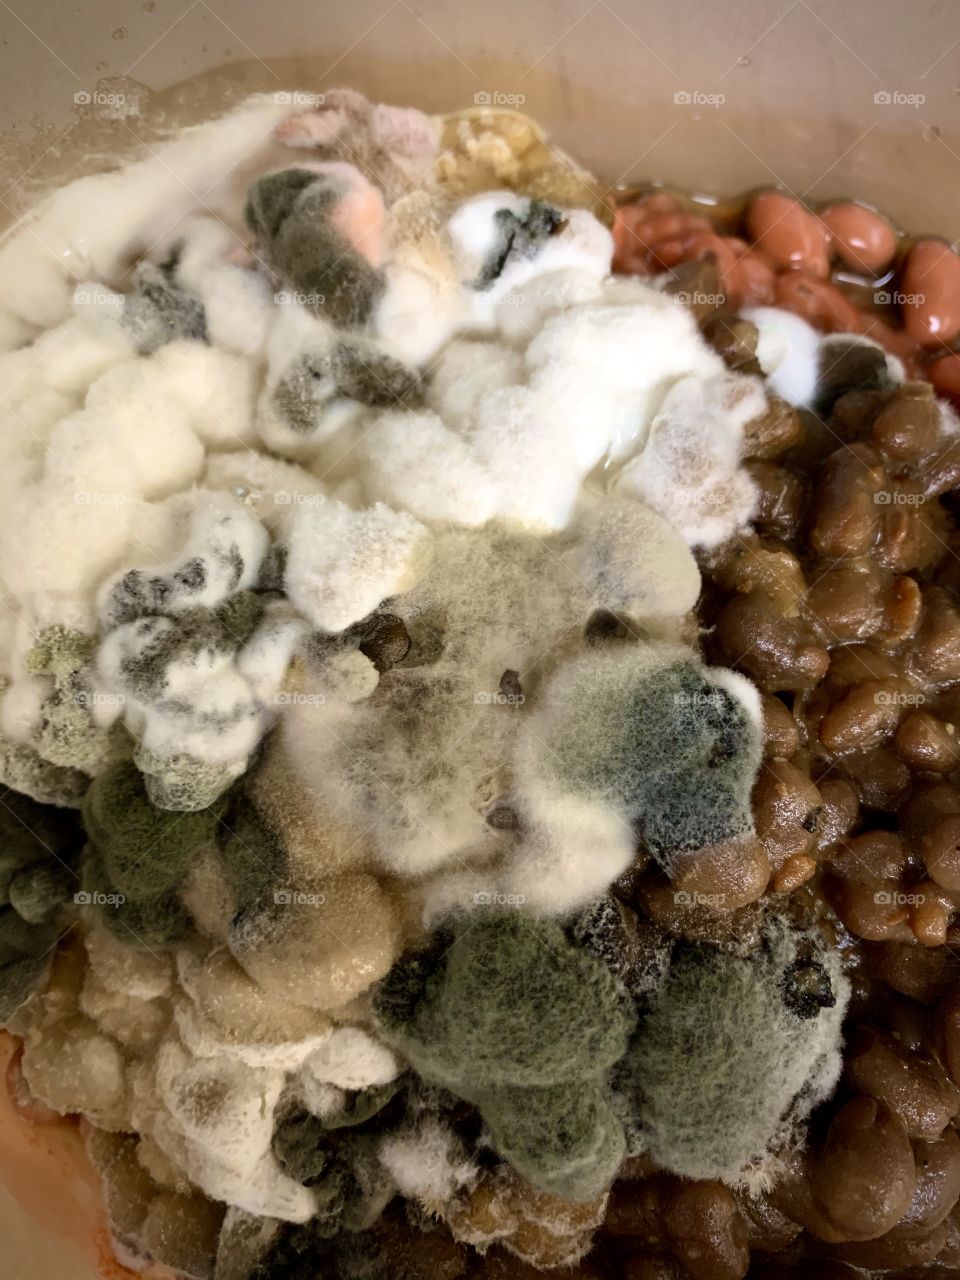 Mold on baked beans